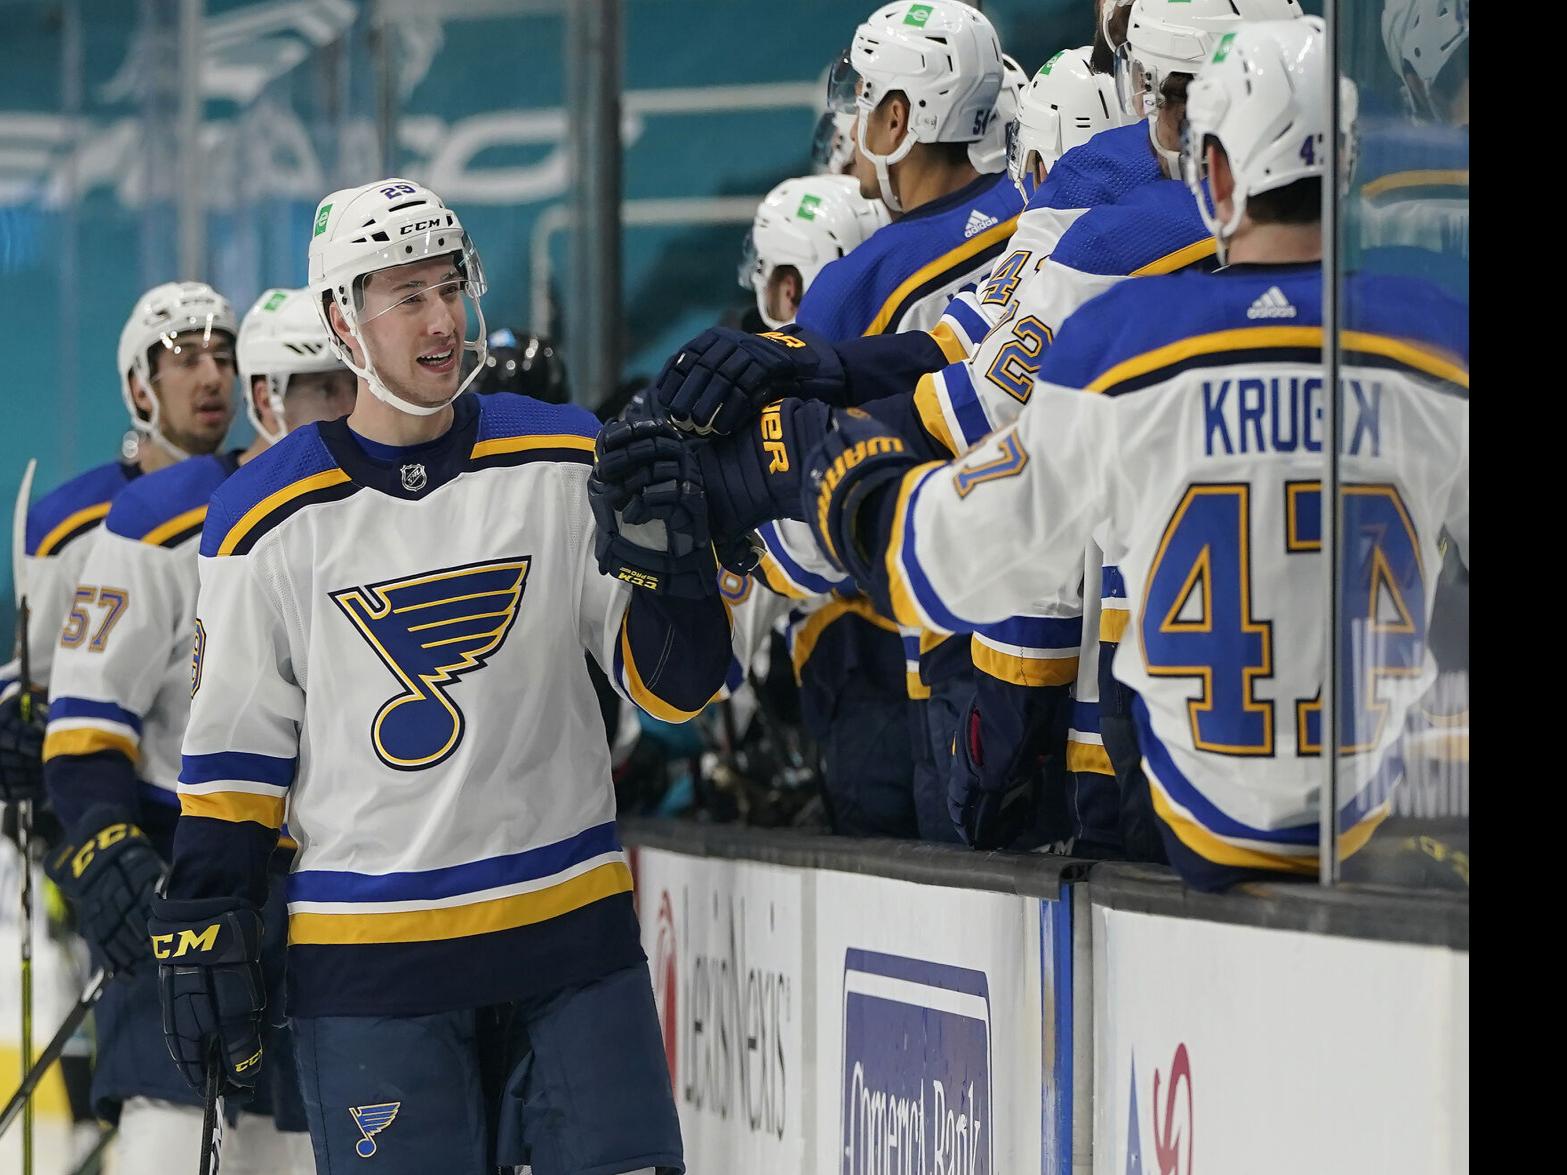 St. Louis Blues Forward Tyler Bozak Out Day-To-Day With Upper Body